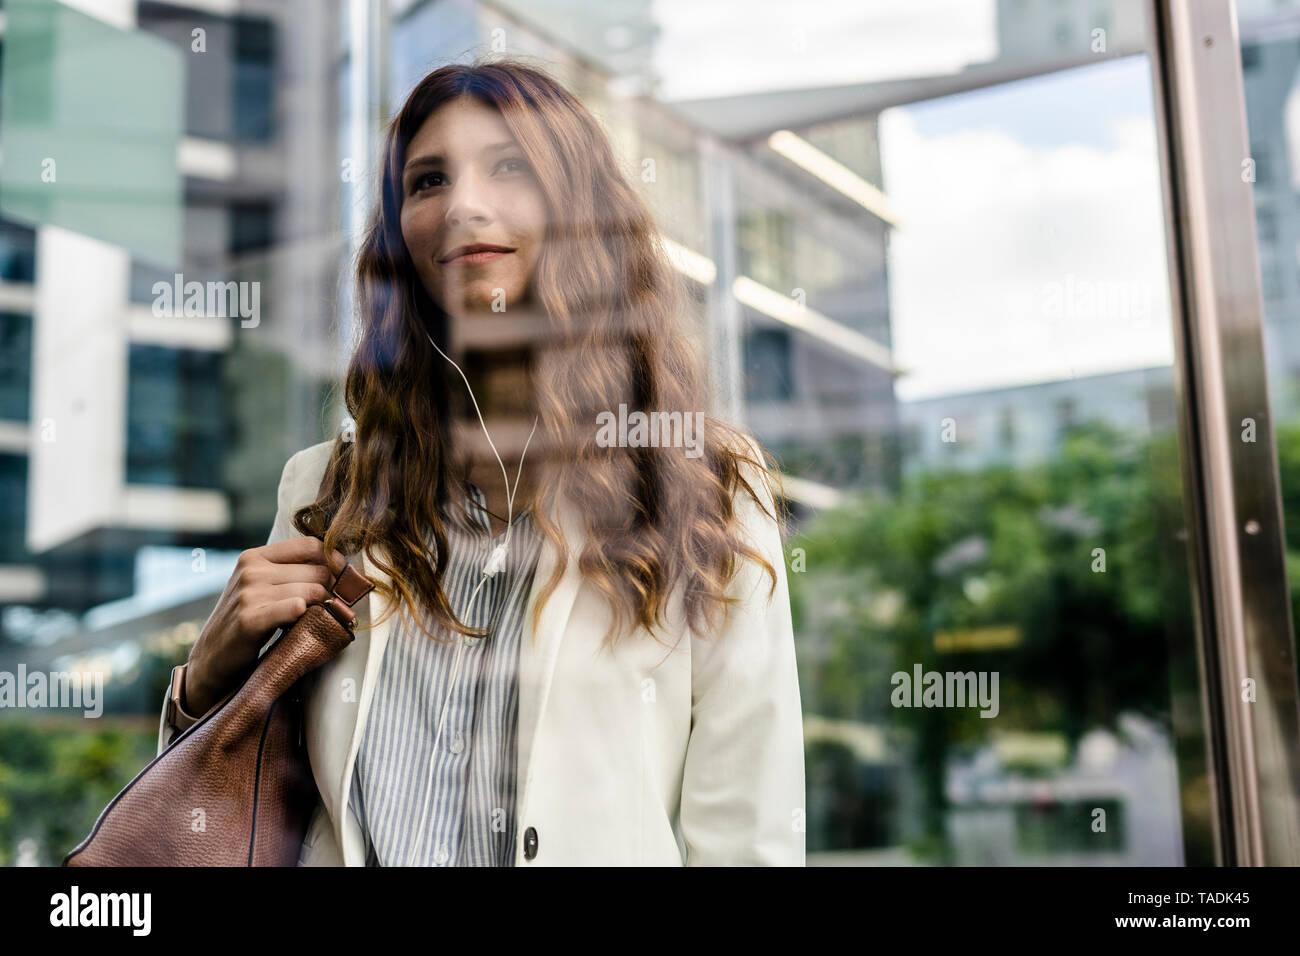 Young businesswoman communting in the city, using earphones Stock Photo